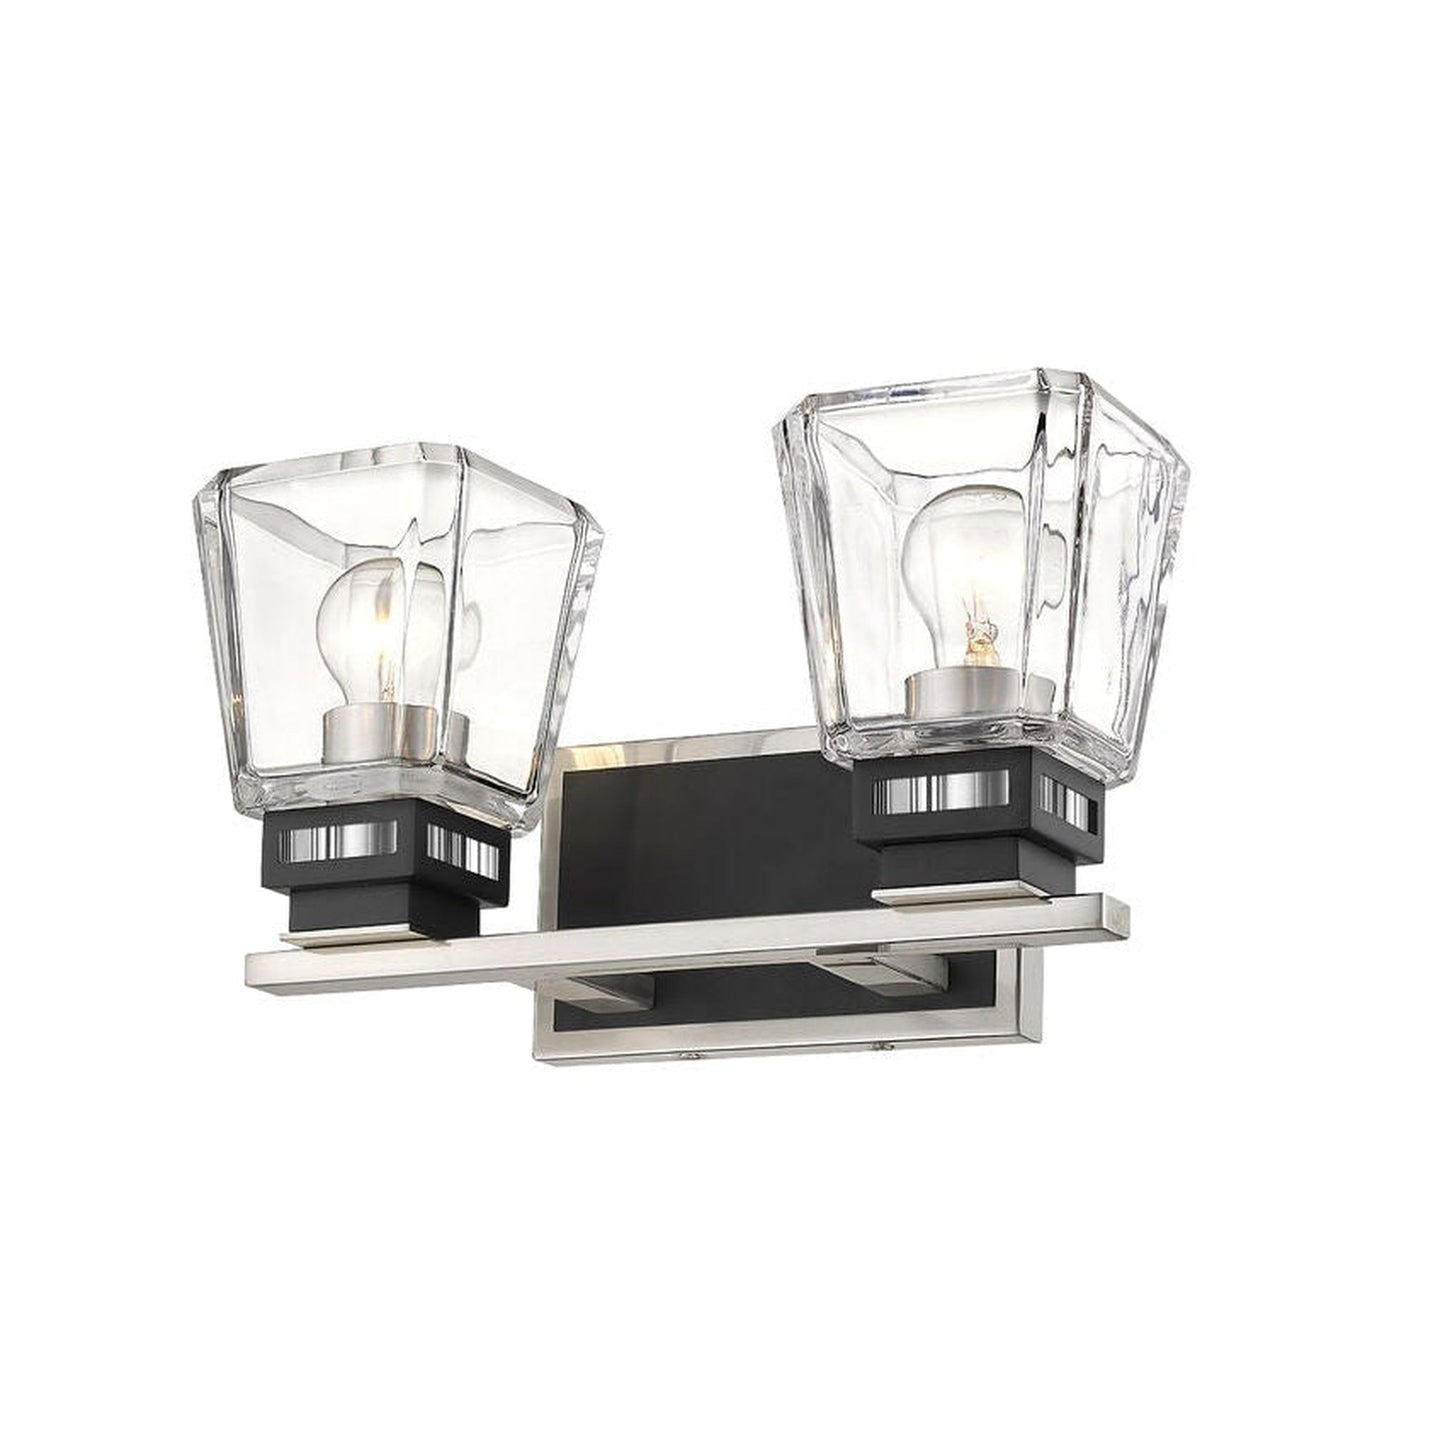 Z-Lite Jackson 14" 2-Light Brushed Nickel and Matte Black Vanity Light With Clear Glass Shade